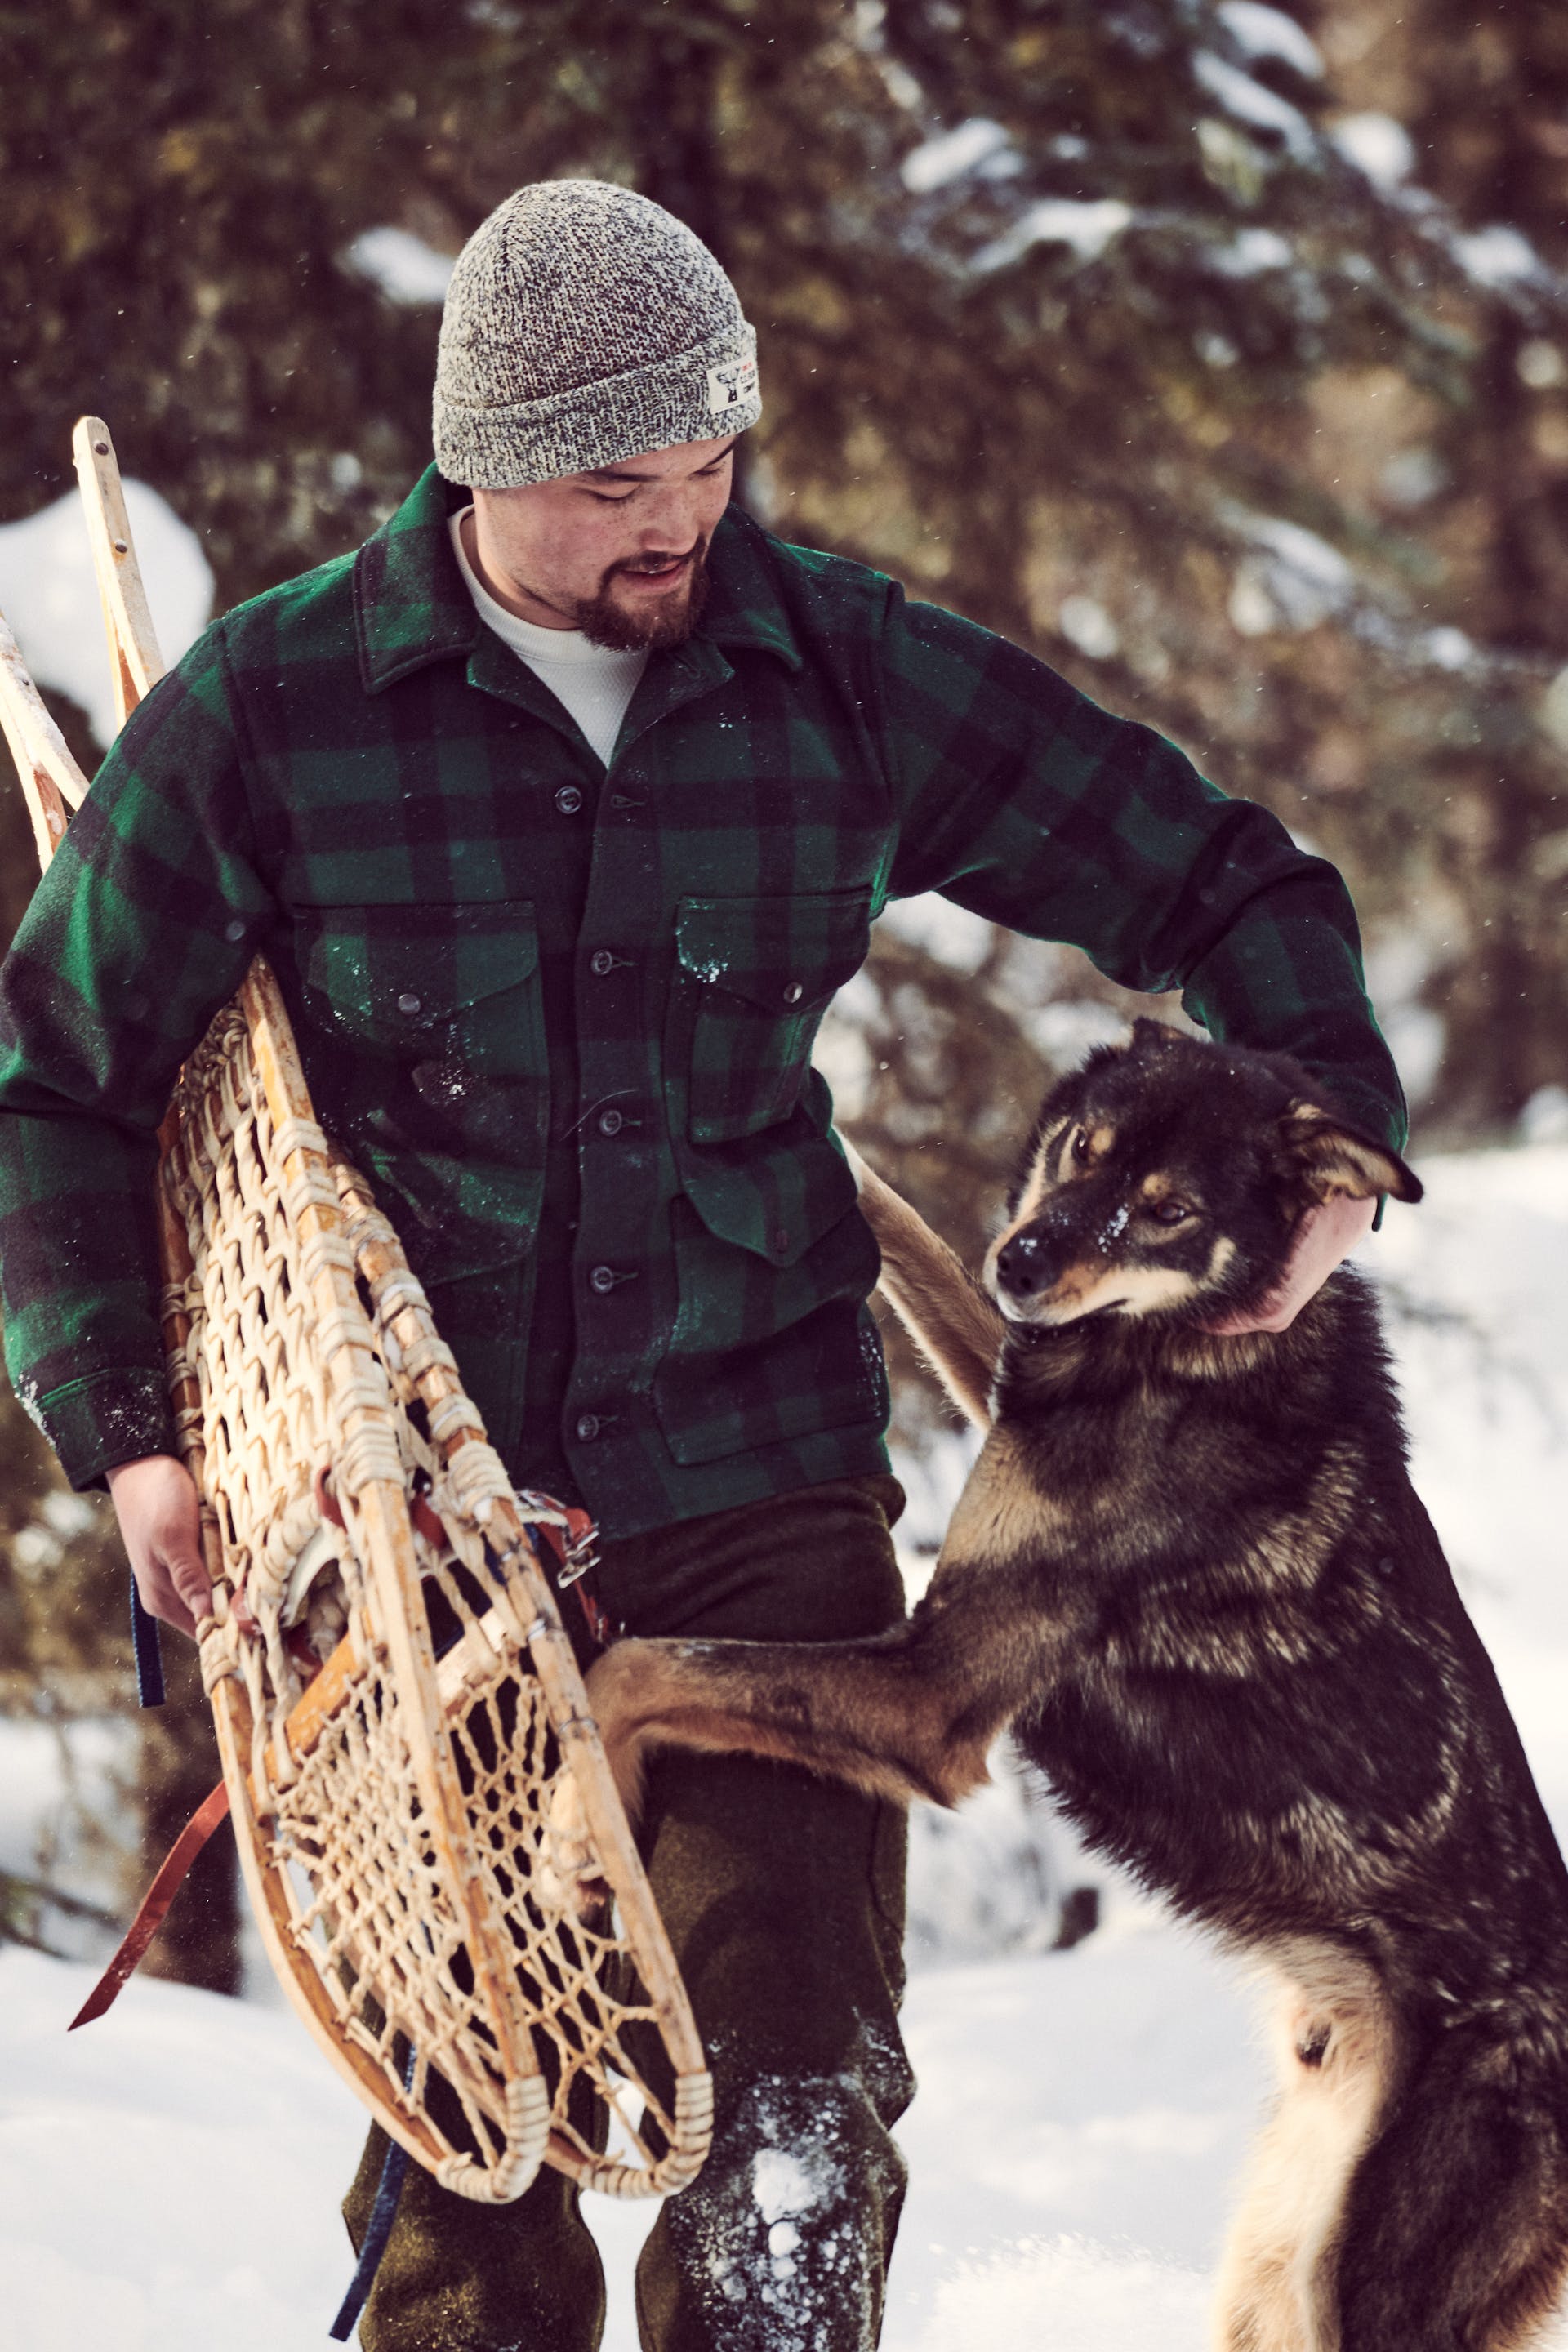 Man wearing Filson Mackinaw Wool Cruiser Jacket in green/black plaid holding snowshoes while playing with his dog